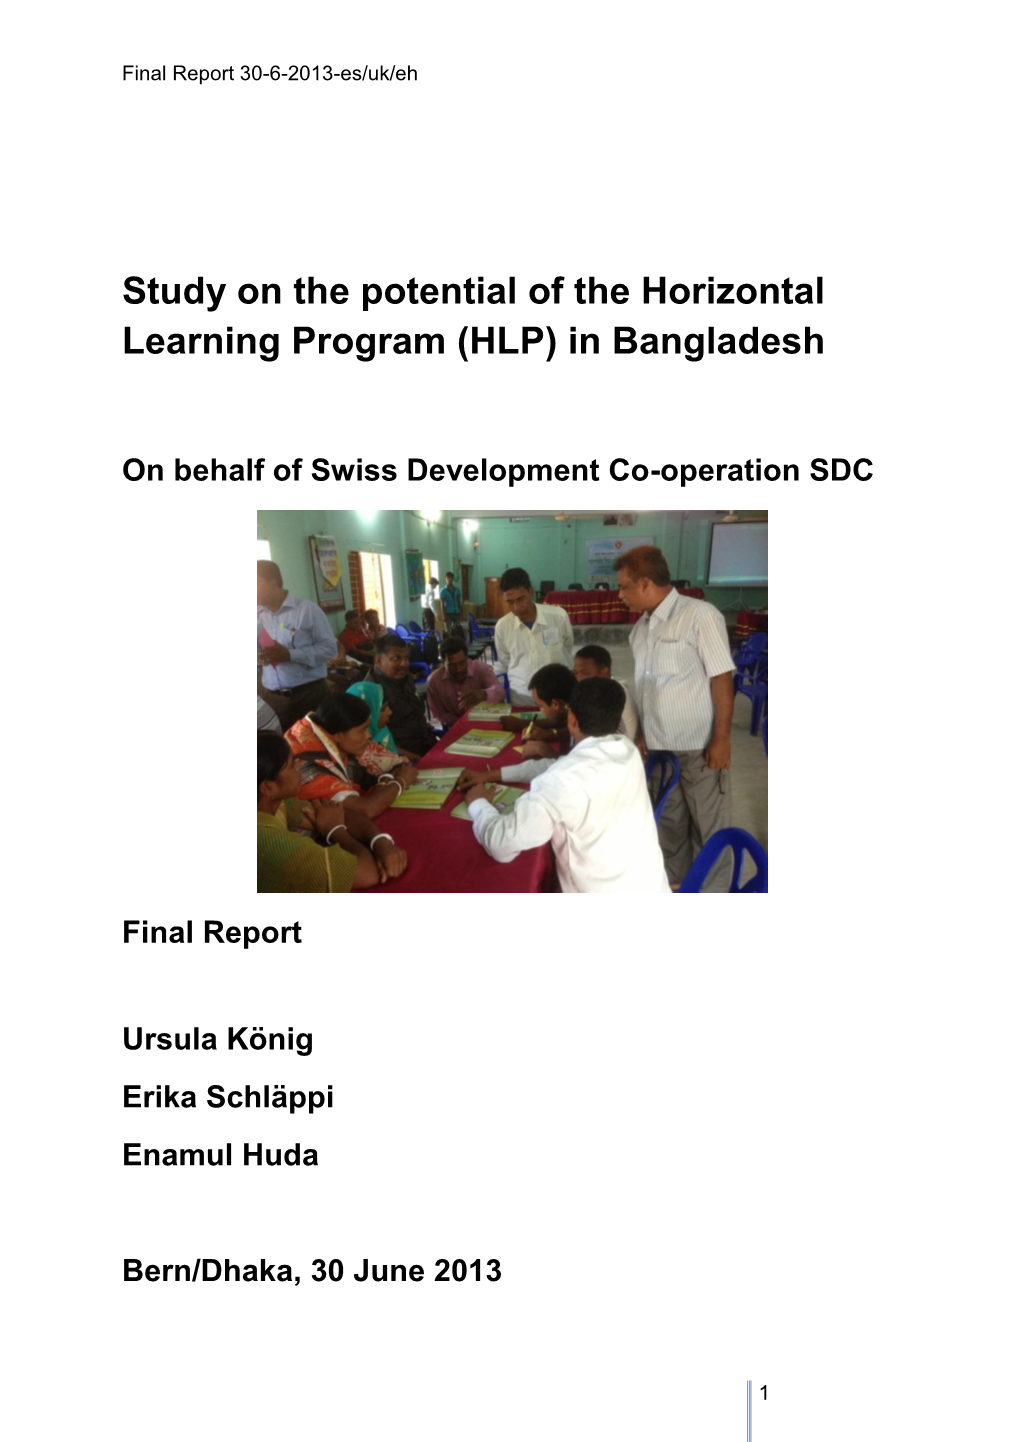 Study on the Potential of the Horizontal Learning Program (HLP) in Bangladesh